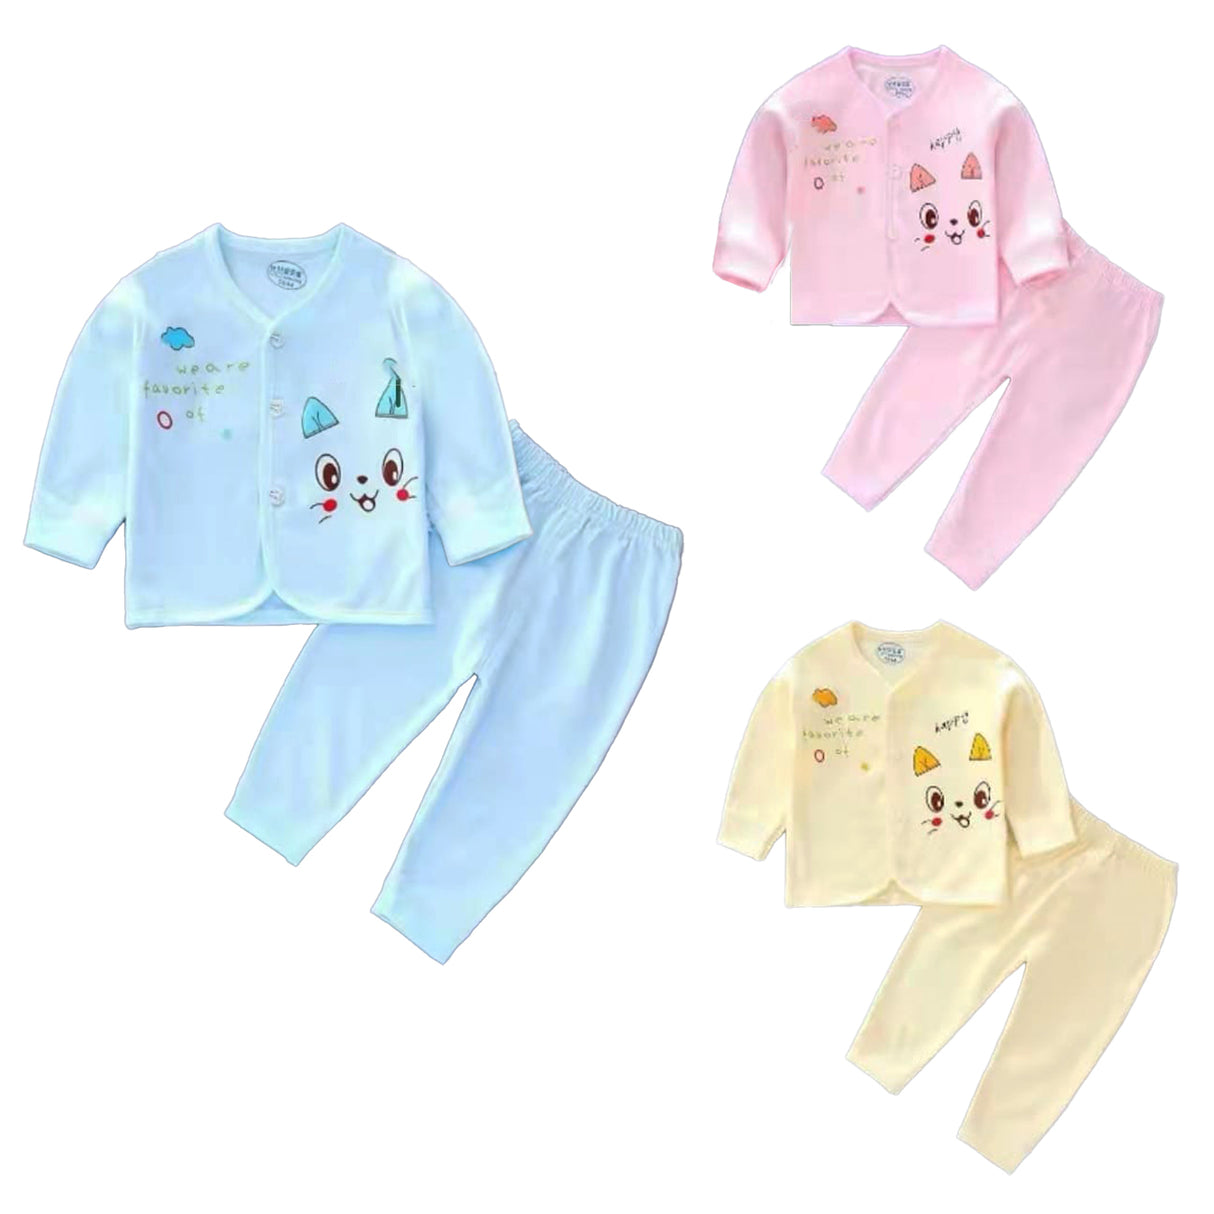 Smiling Cat Full Sleeves Top And Pyjama Buttoned Cotton Night Suit